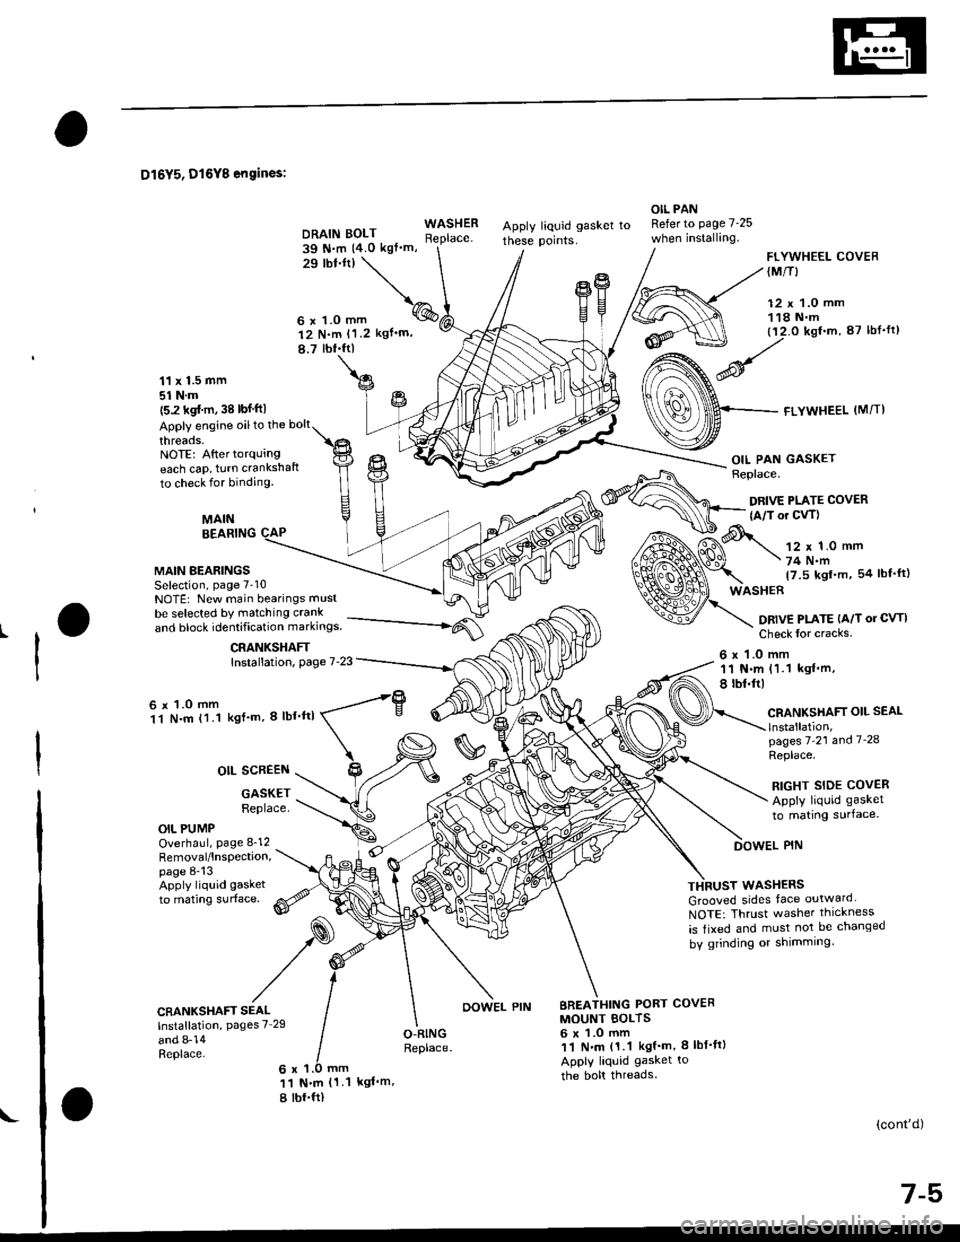 HONDA CIVIC 1996 6.G Workshop Manual D16Y5, D16Y8 engines:
DRAIN BOLT39 N.m 14.0 kgtm,
Apply liquid gasket to
these points.
OIL PANRefer to page 7-25
when installing.WASHERReplace.
29 lbl.tt) 
\
\^
6 x 1.0 mm q%
P
I
FLYWHEEL COVER(M/T}
